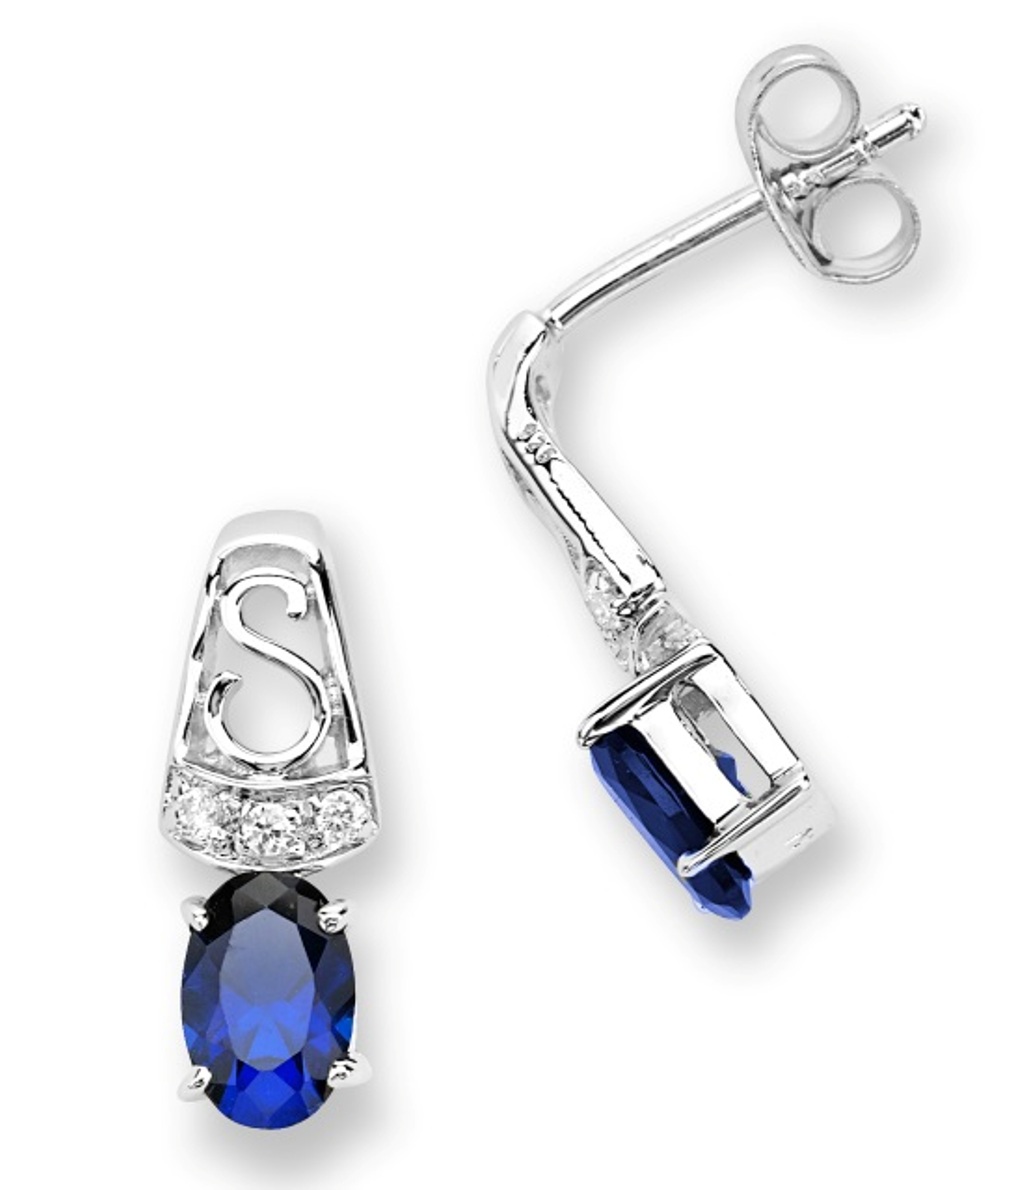 Created Oval Blue Sapphire and CZ Stud Earrings, Rhodium Plated Sterling Silver